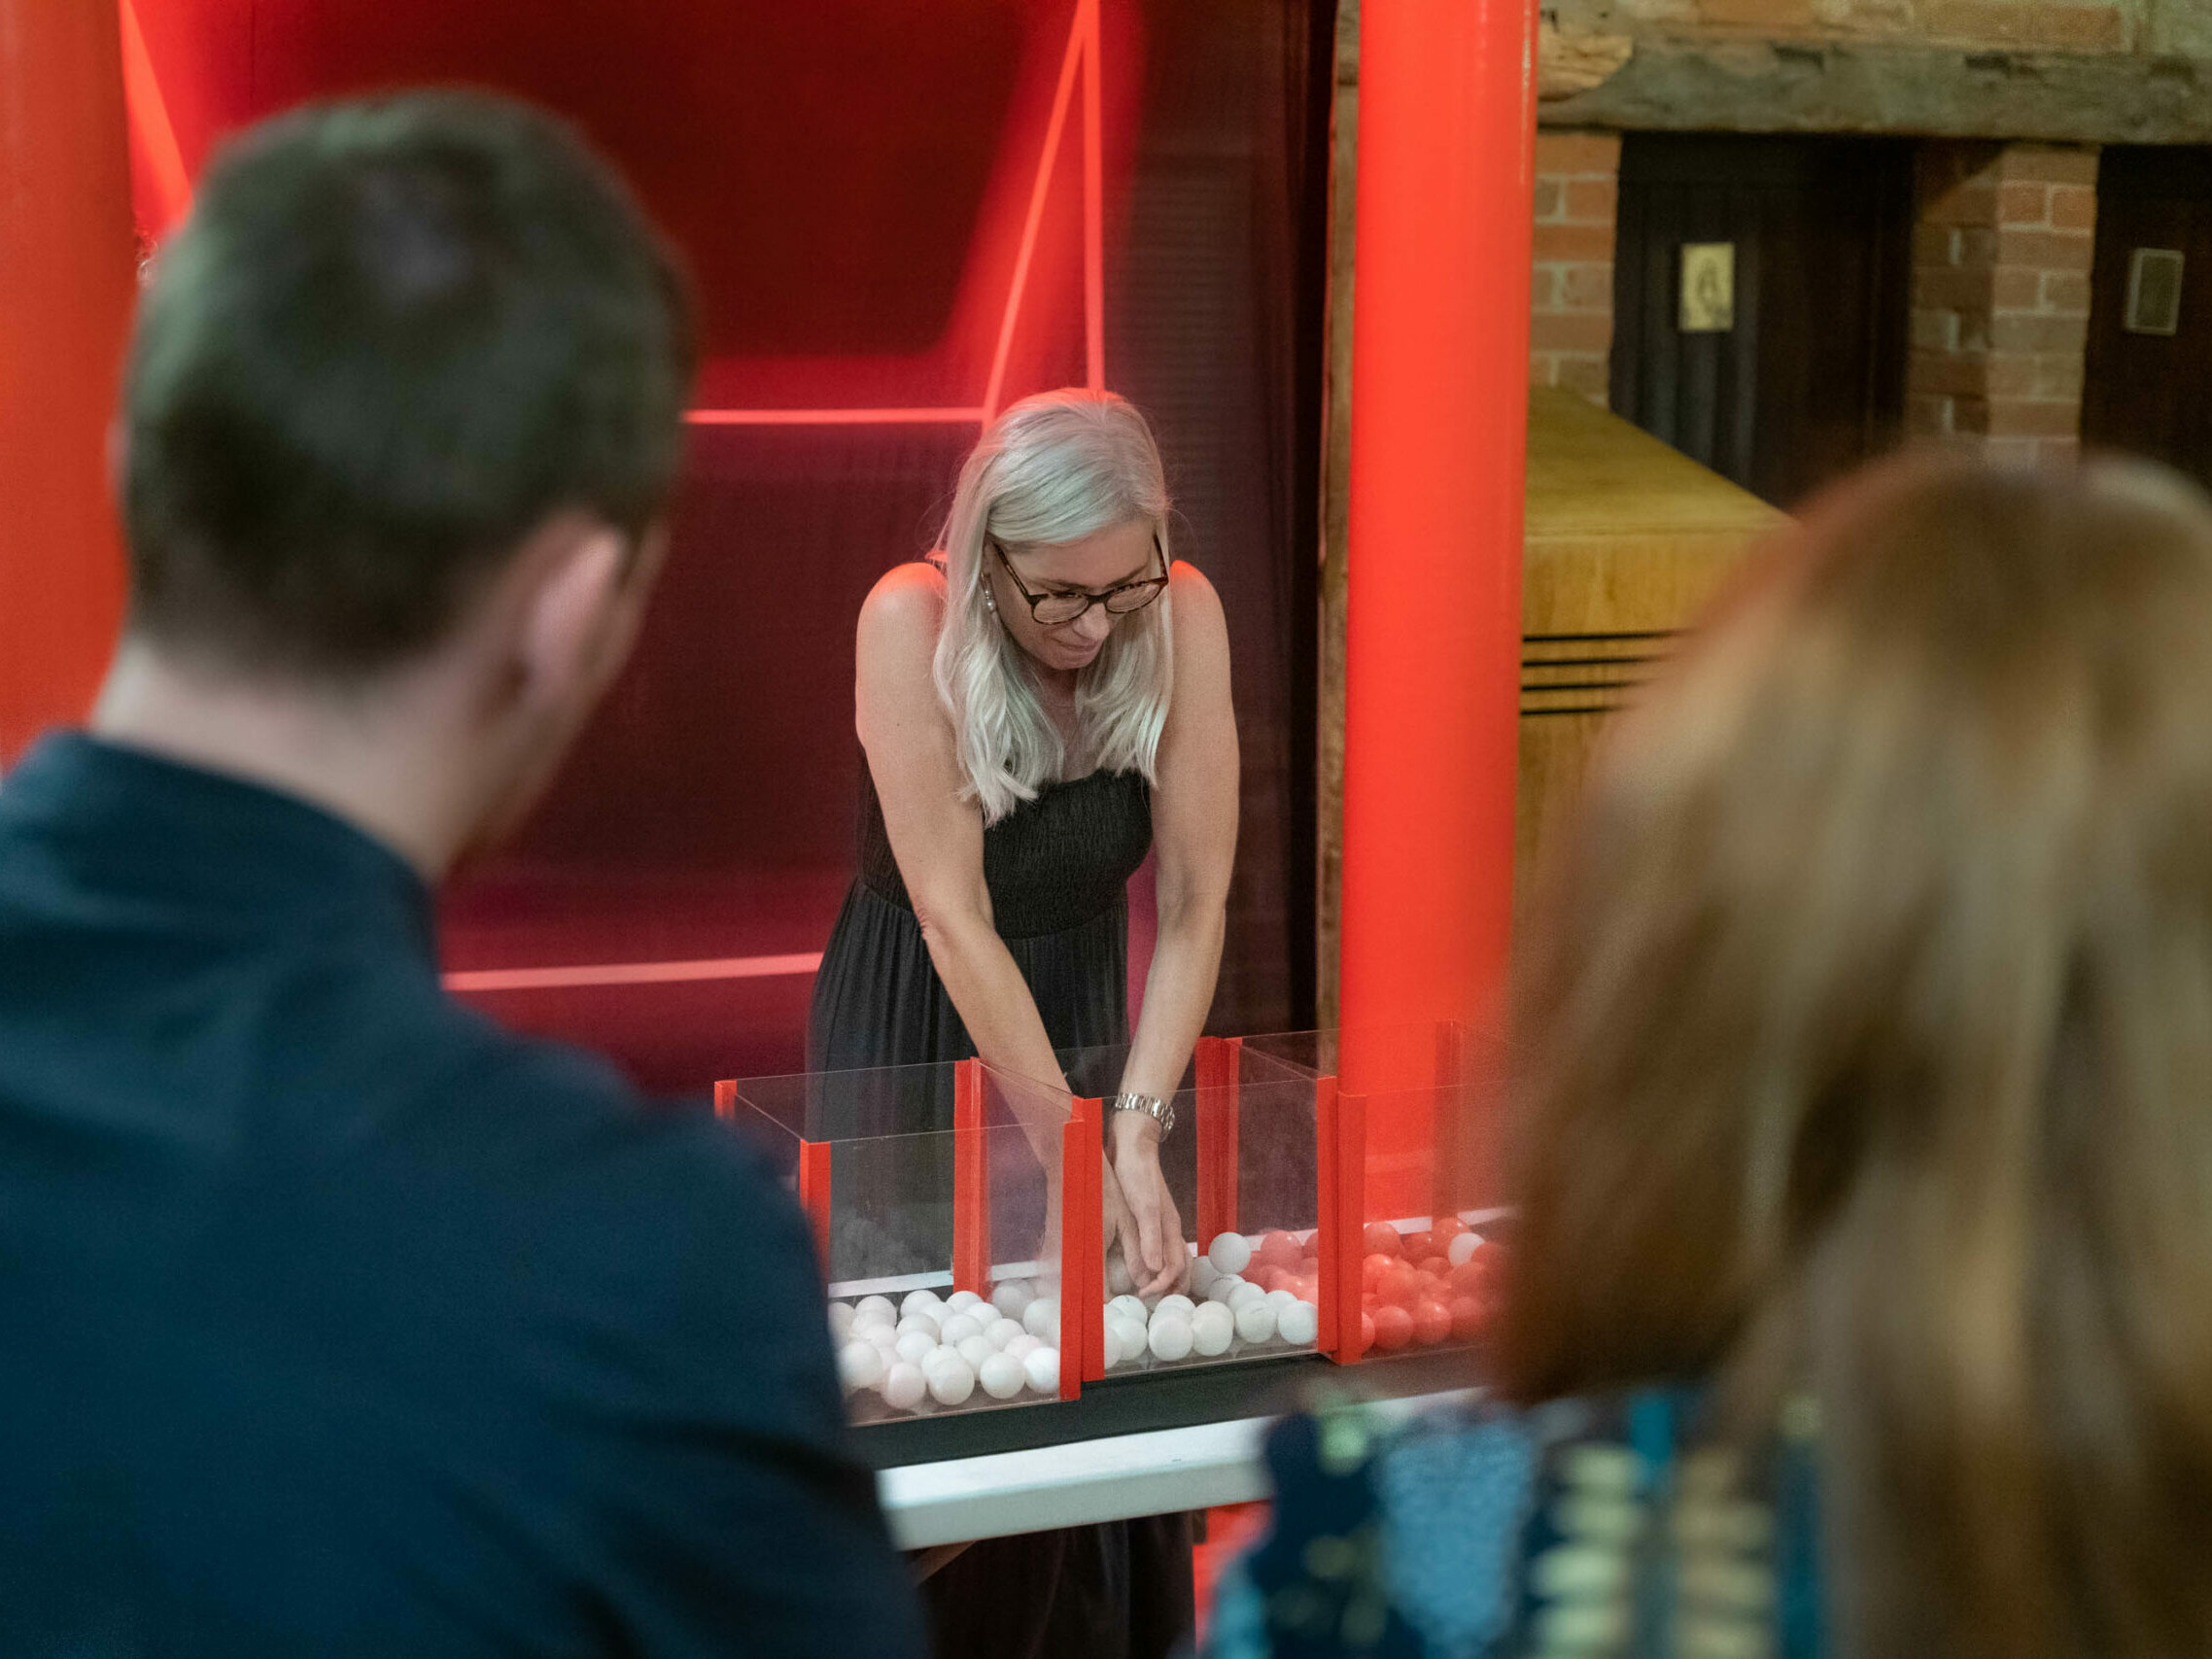 A woman separating coloured balls during an Under Pressure team building game